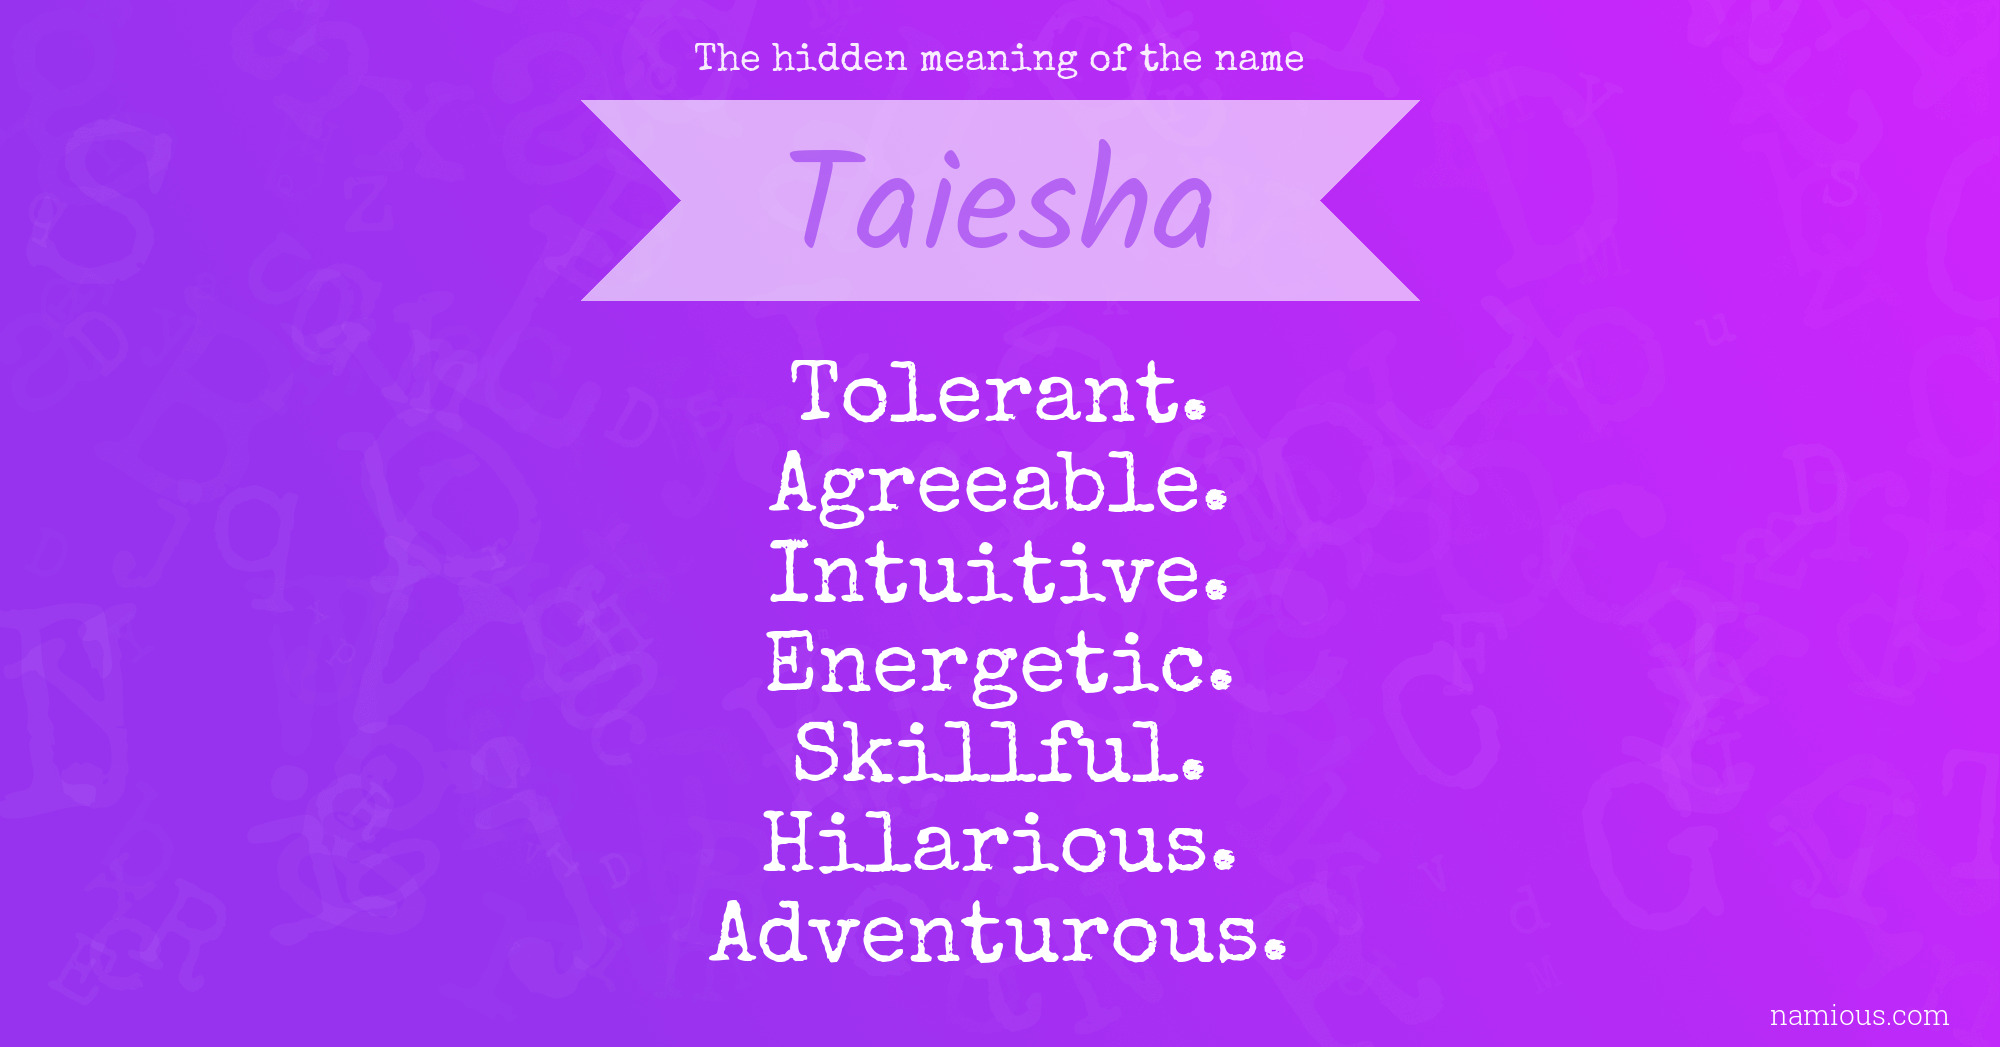 The hidden meaning of the name Taiesha